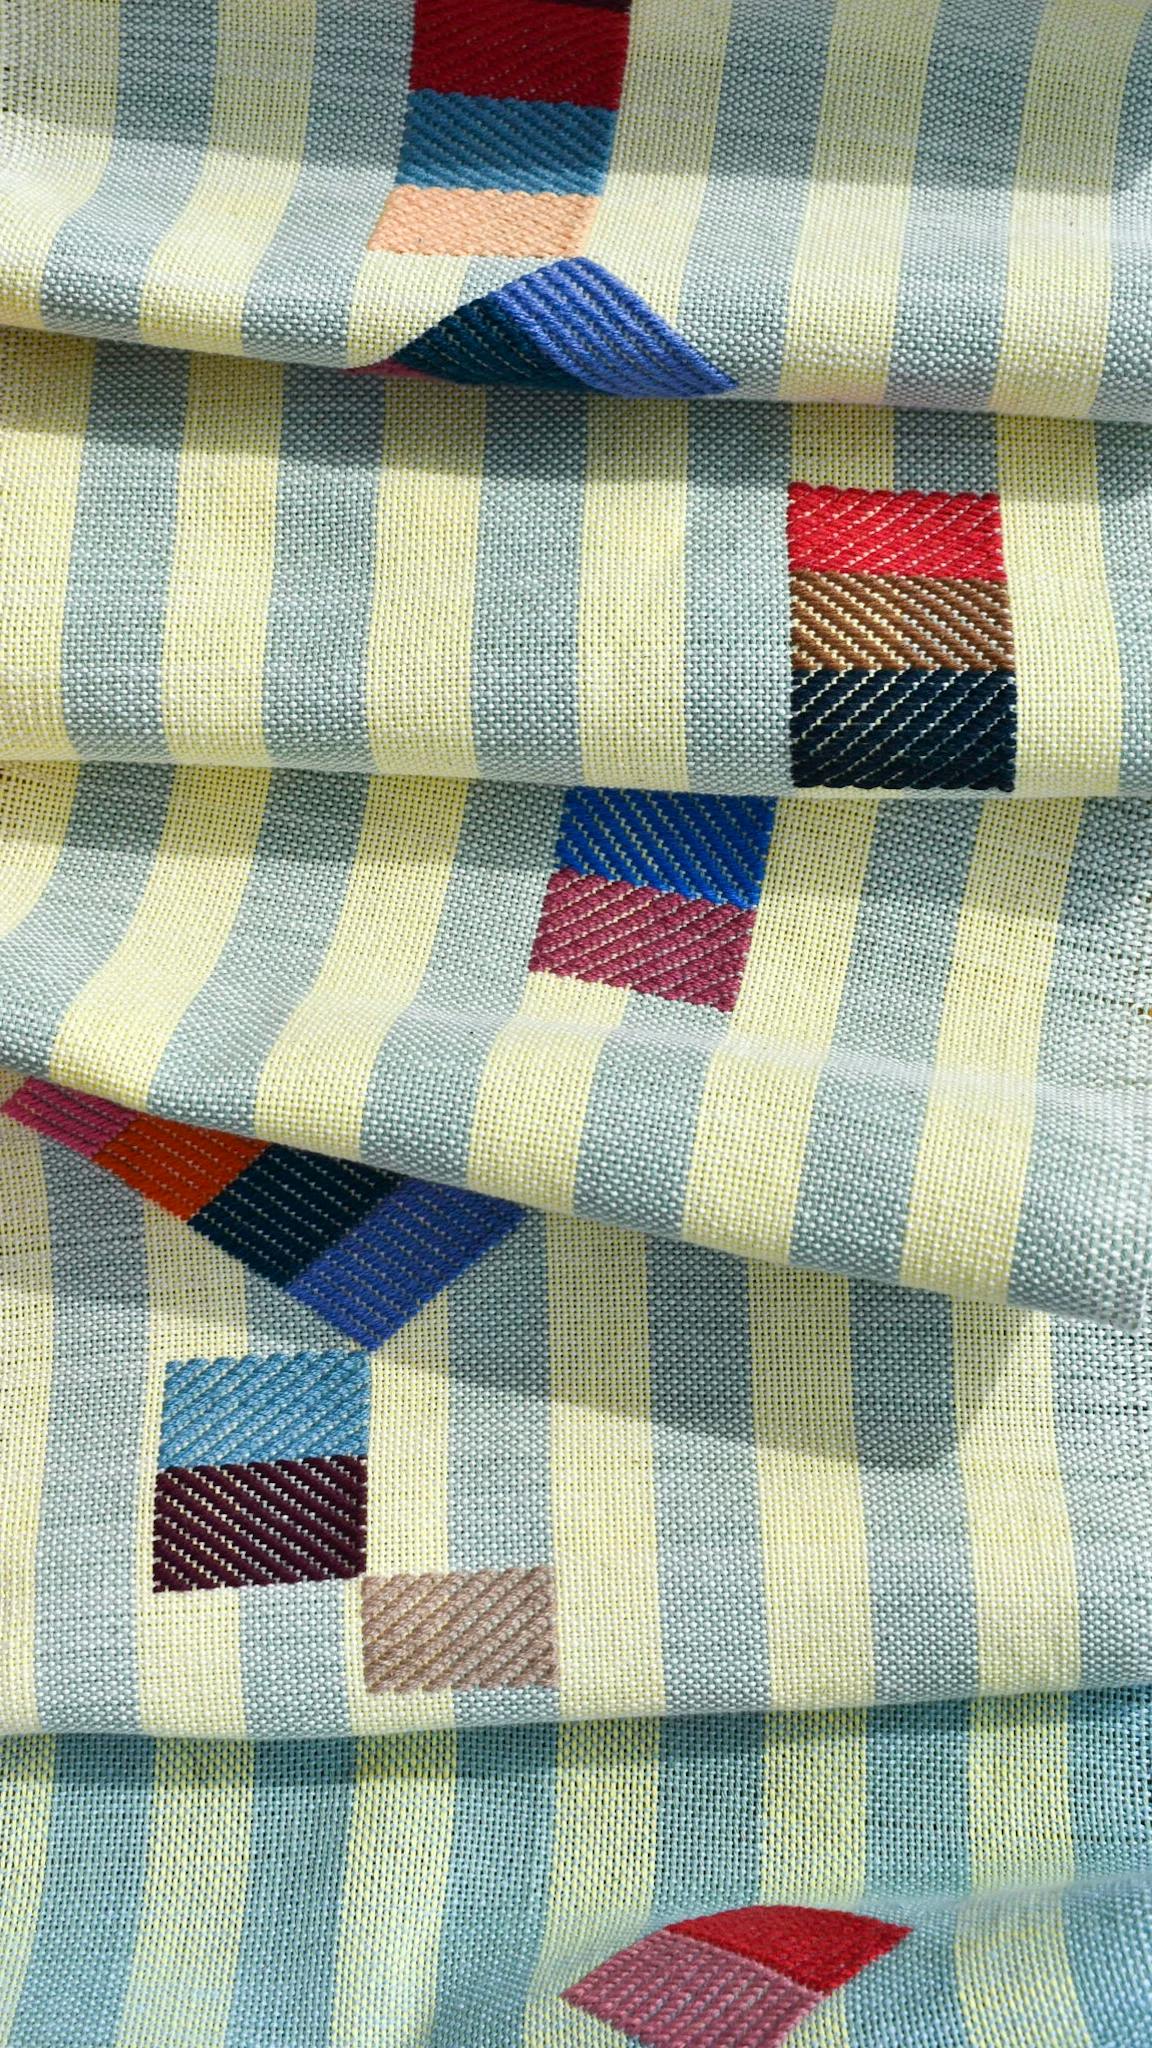 A close-up of blue and yellow striped fabric with folds in it, handwoven by artist Sarah Sullivan Sherrod.